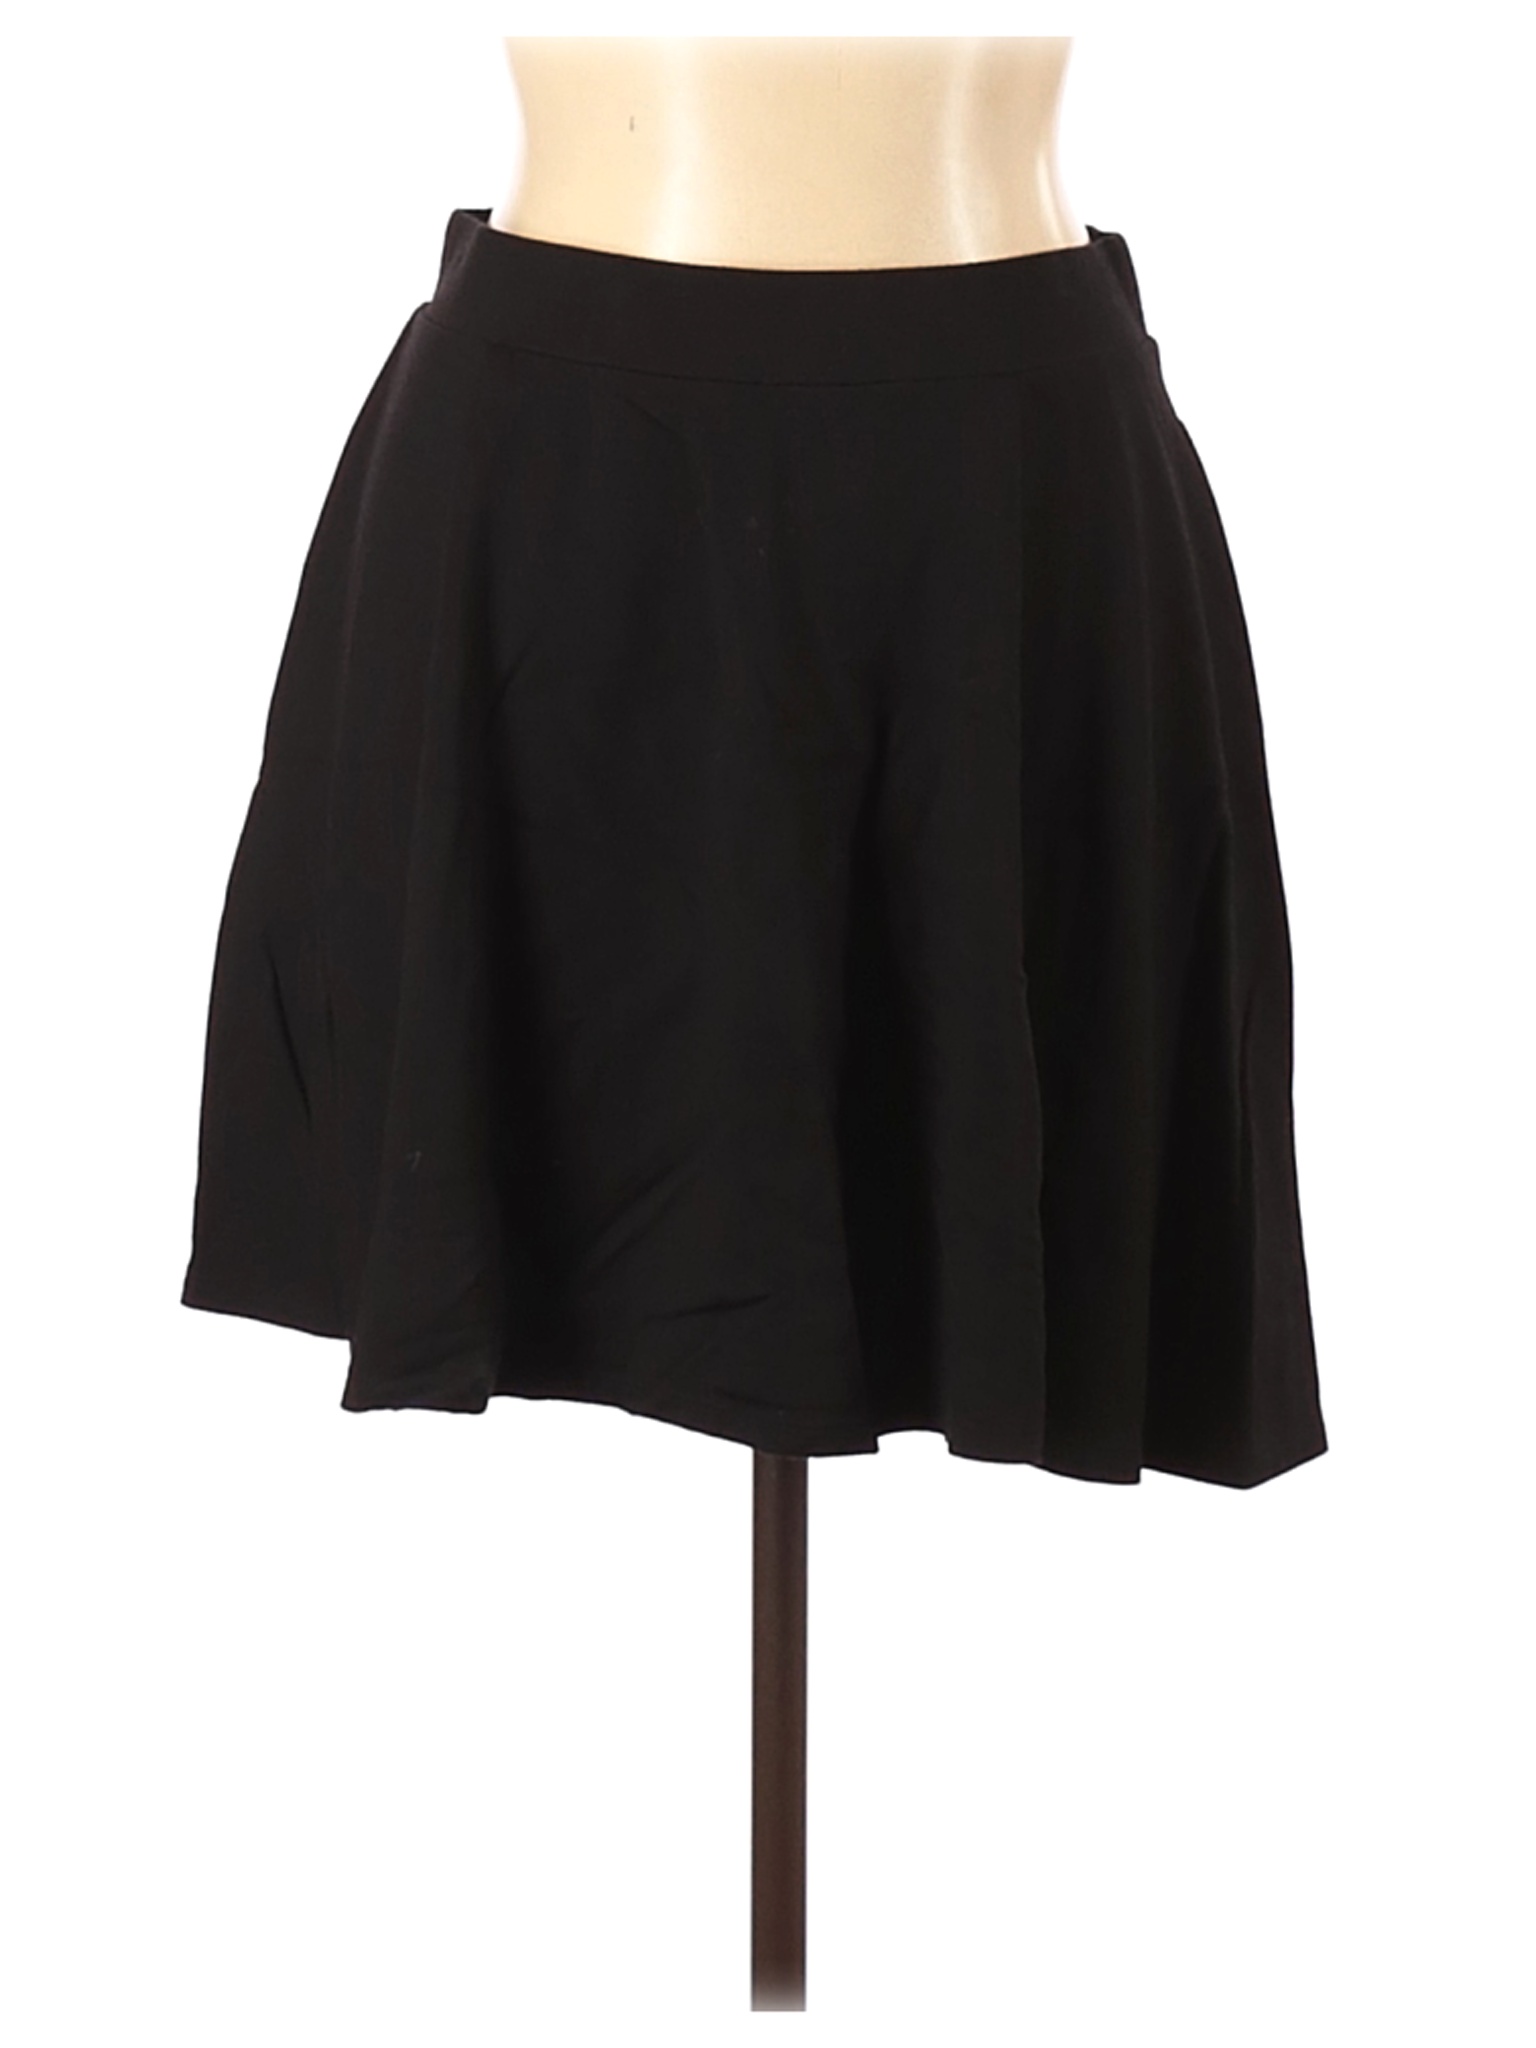 Divided by H&M Women Black Casual Skirt L | eBay